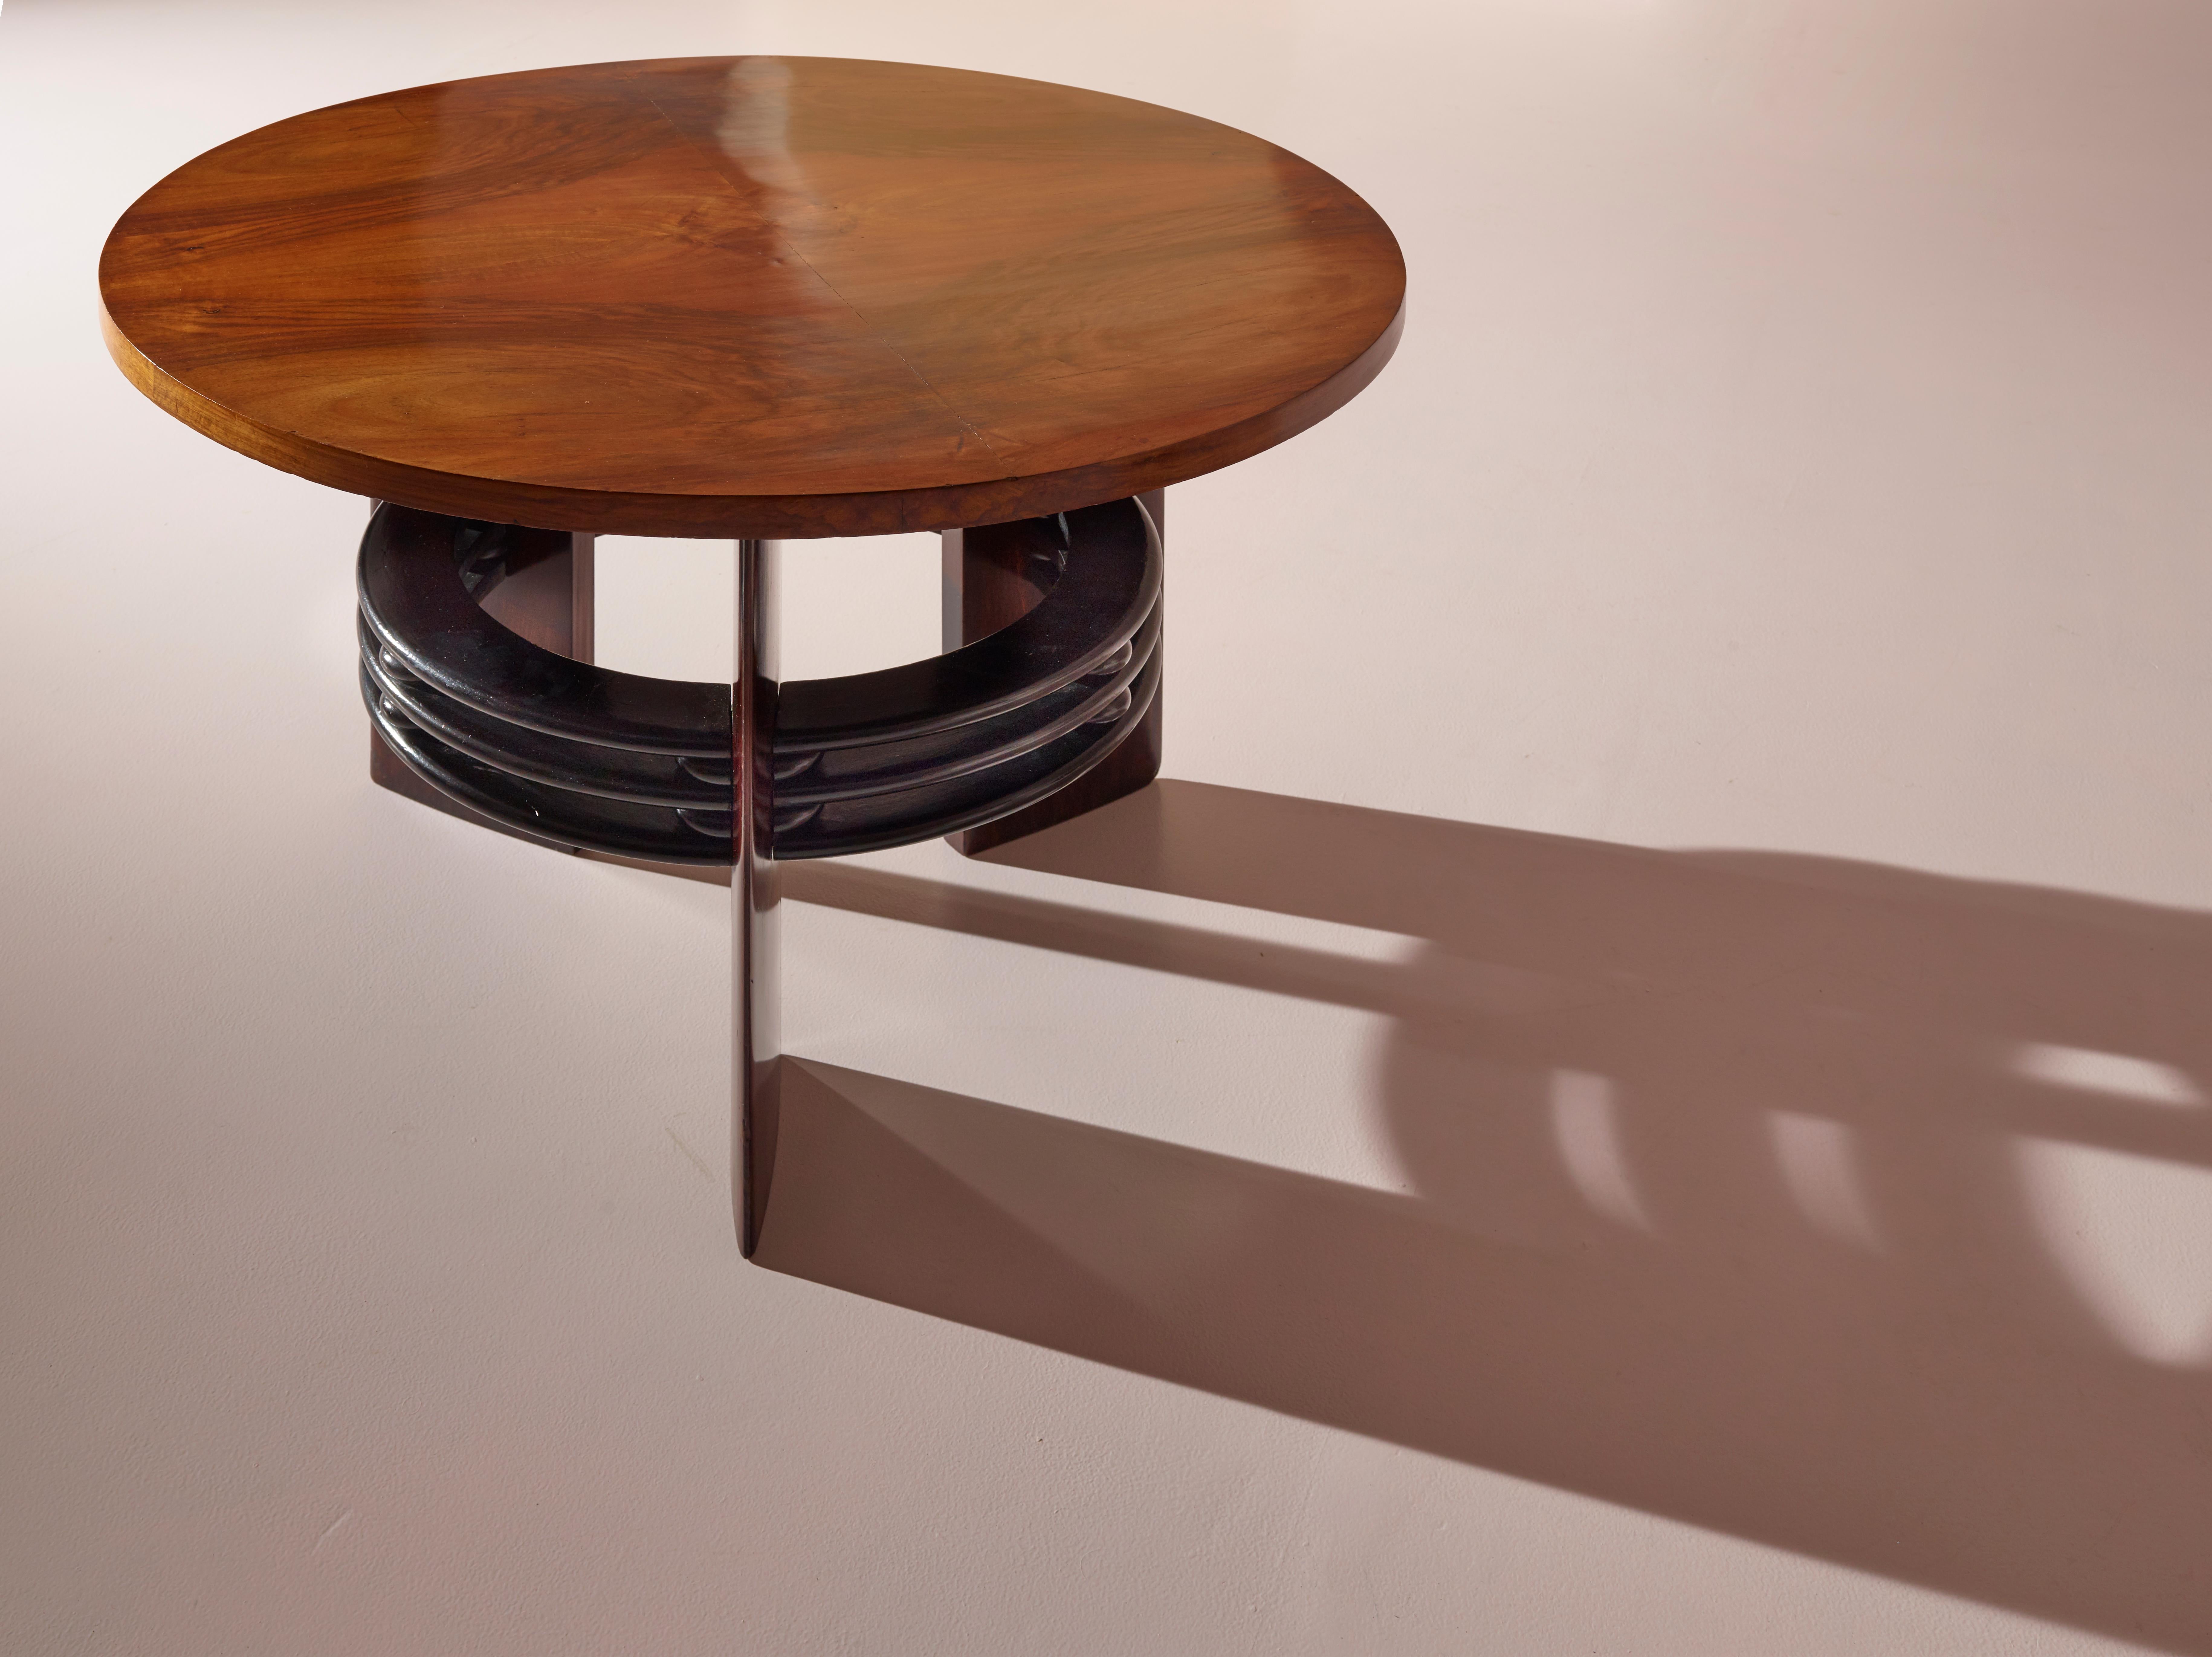 An elegant and sophisticated coffee table designed by the renowned Italian designer Osvaldo Borsani and produced in the late 1930s, beginning of 1940s. 

With a diameter of 89cm and a height of 61.5cm, it is the perfect Size for a cozy living room